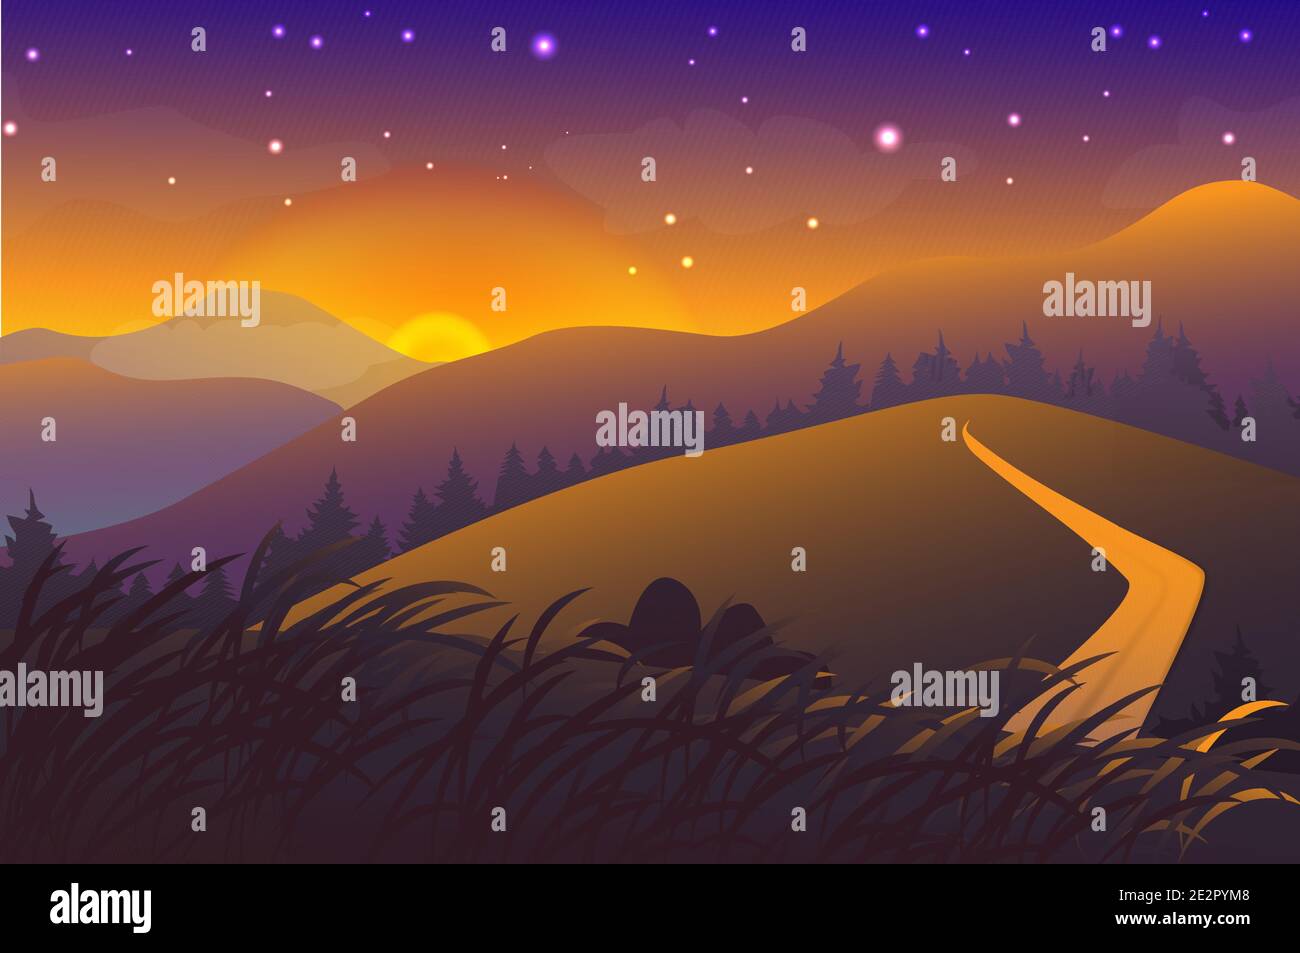 Night landscape. Mountains, sun, sky, clouds, road. Doodle style. Vector illustration Stock Vector